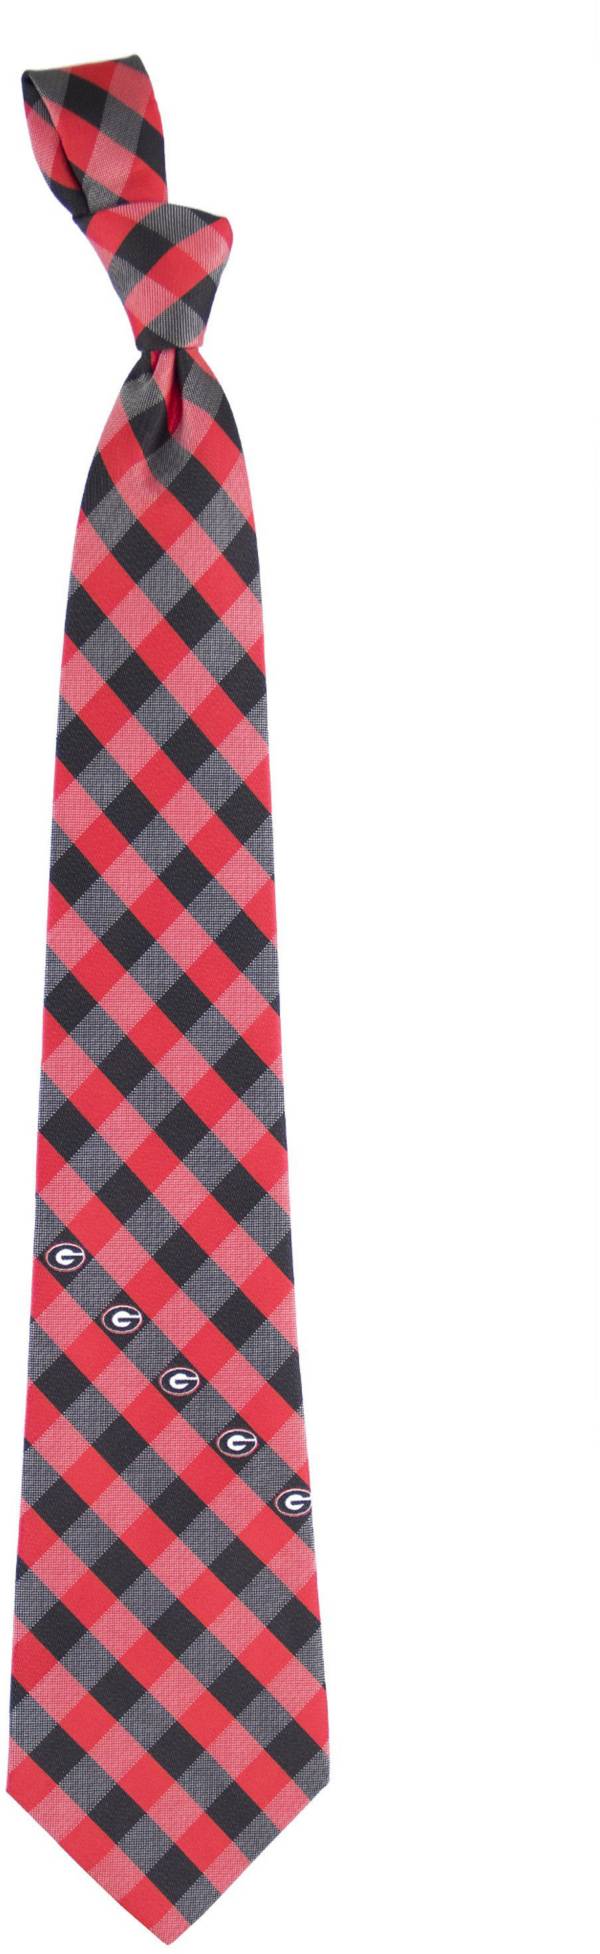 Eagles Wings Georgia Bulldogs Check Necktie product image